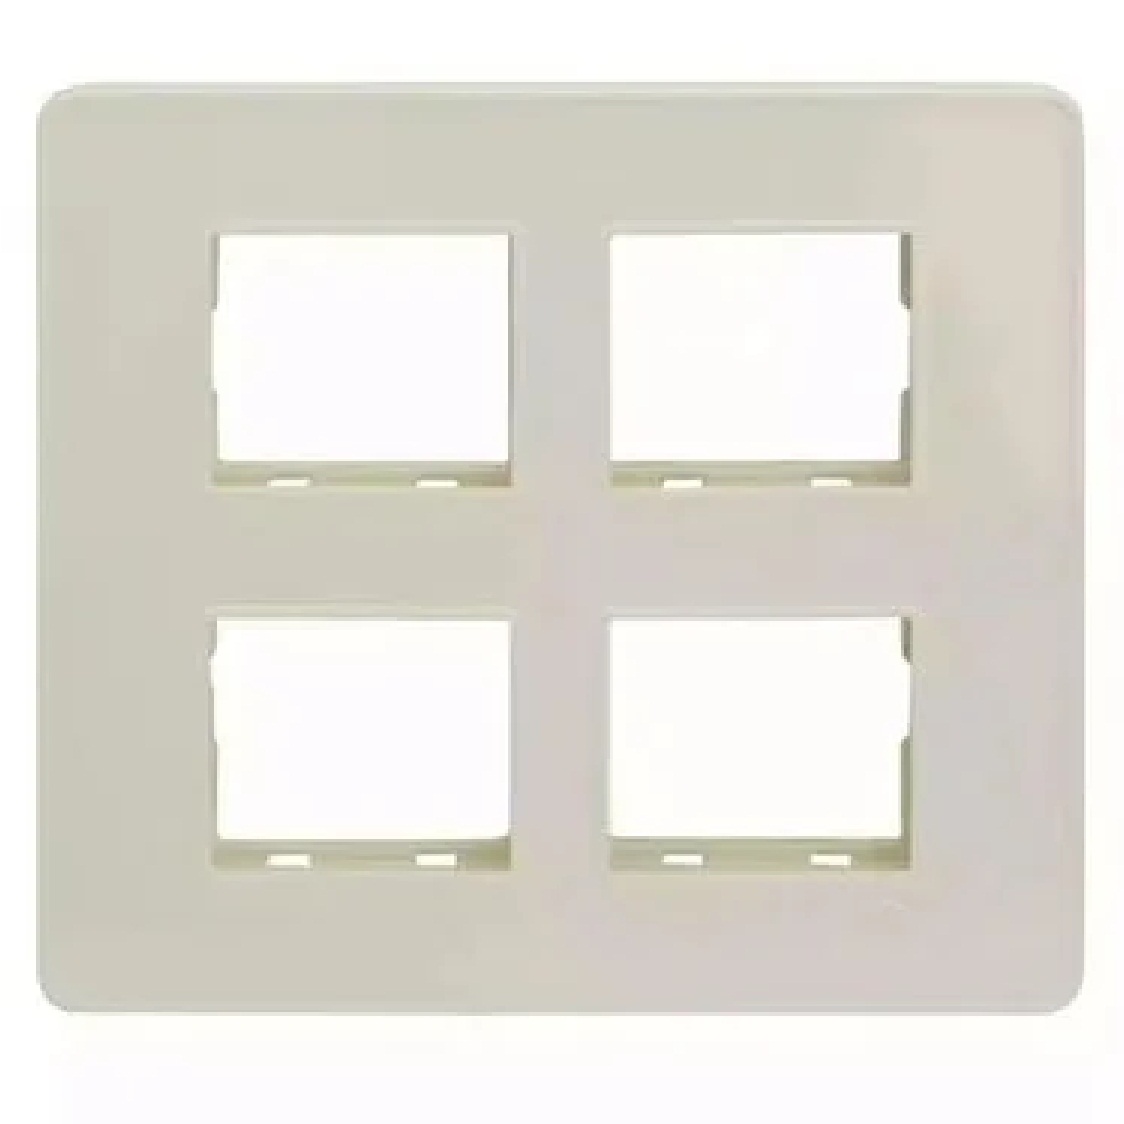 LT Entice 8 Module (Regular) Square Cover Plate with Base Frame - White